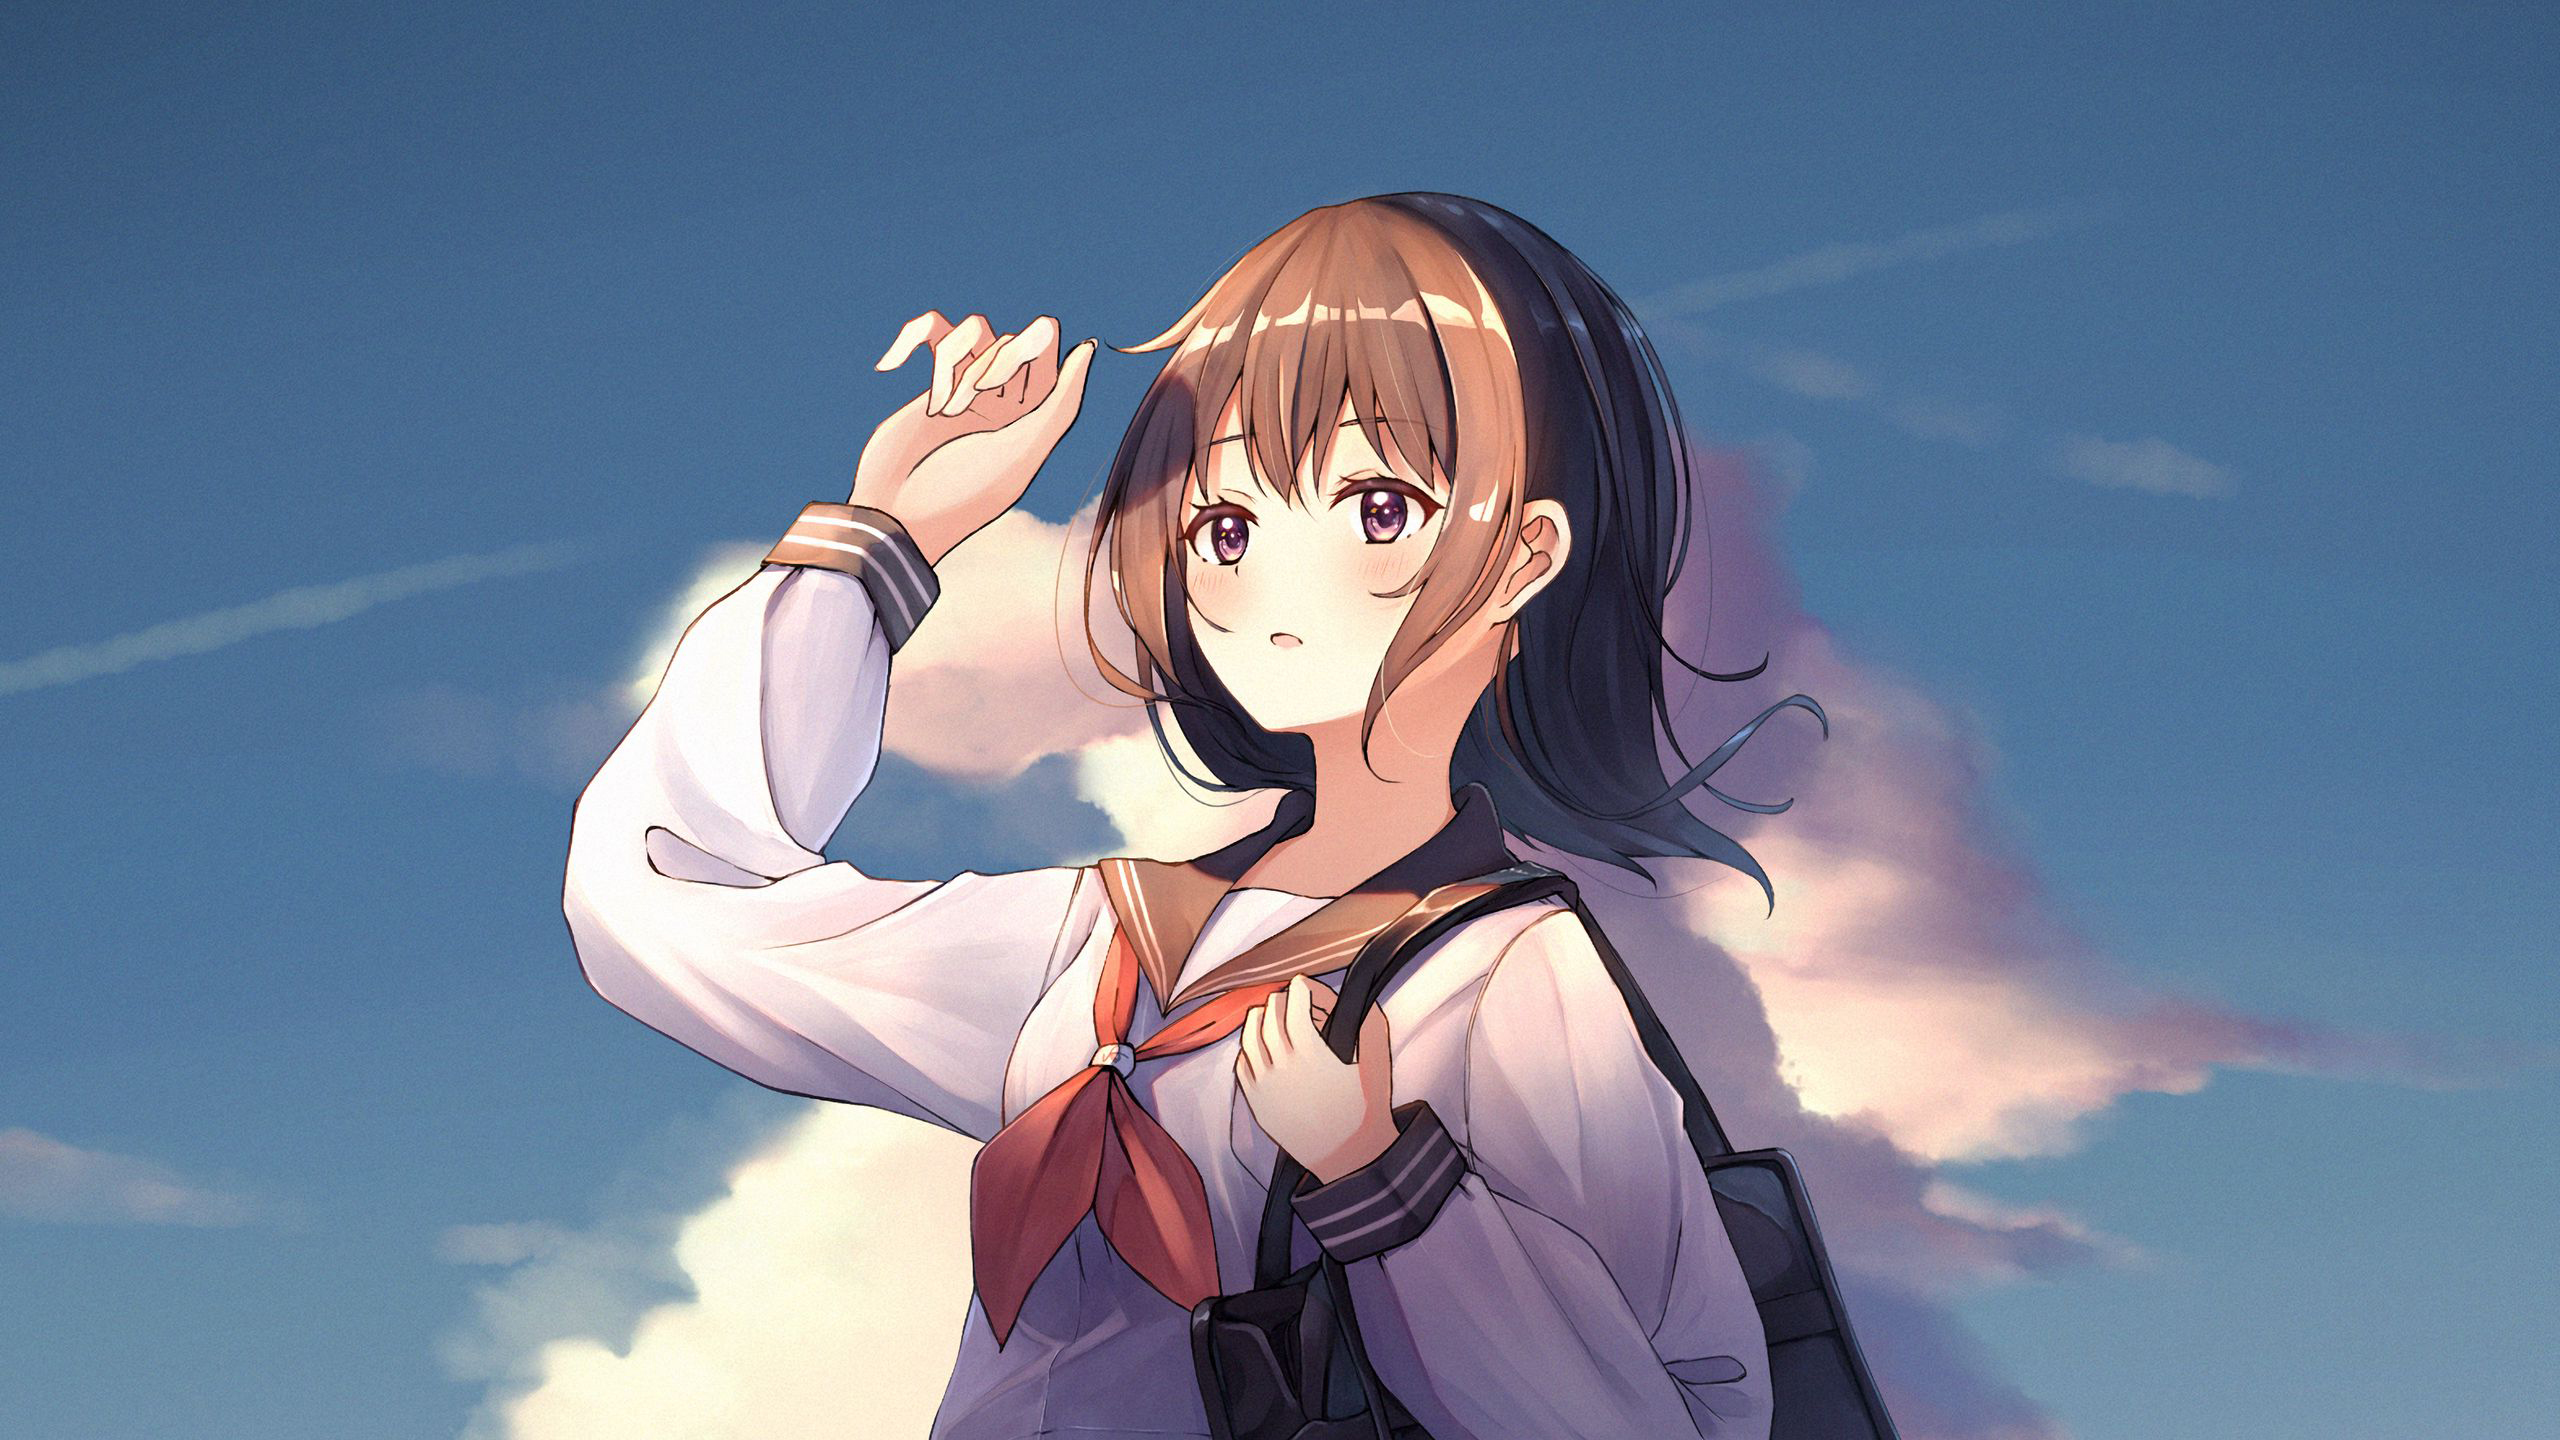 Anime Girl With School Uniform Is Standing In Clouds Blue Sky Wallpaper 2K Anime Girl